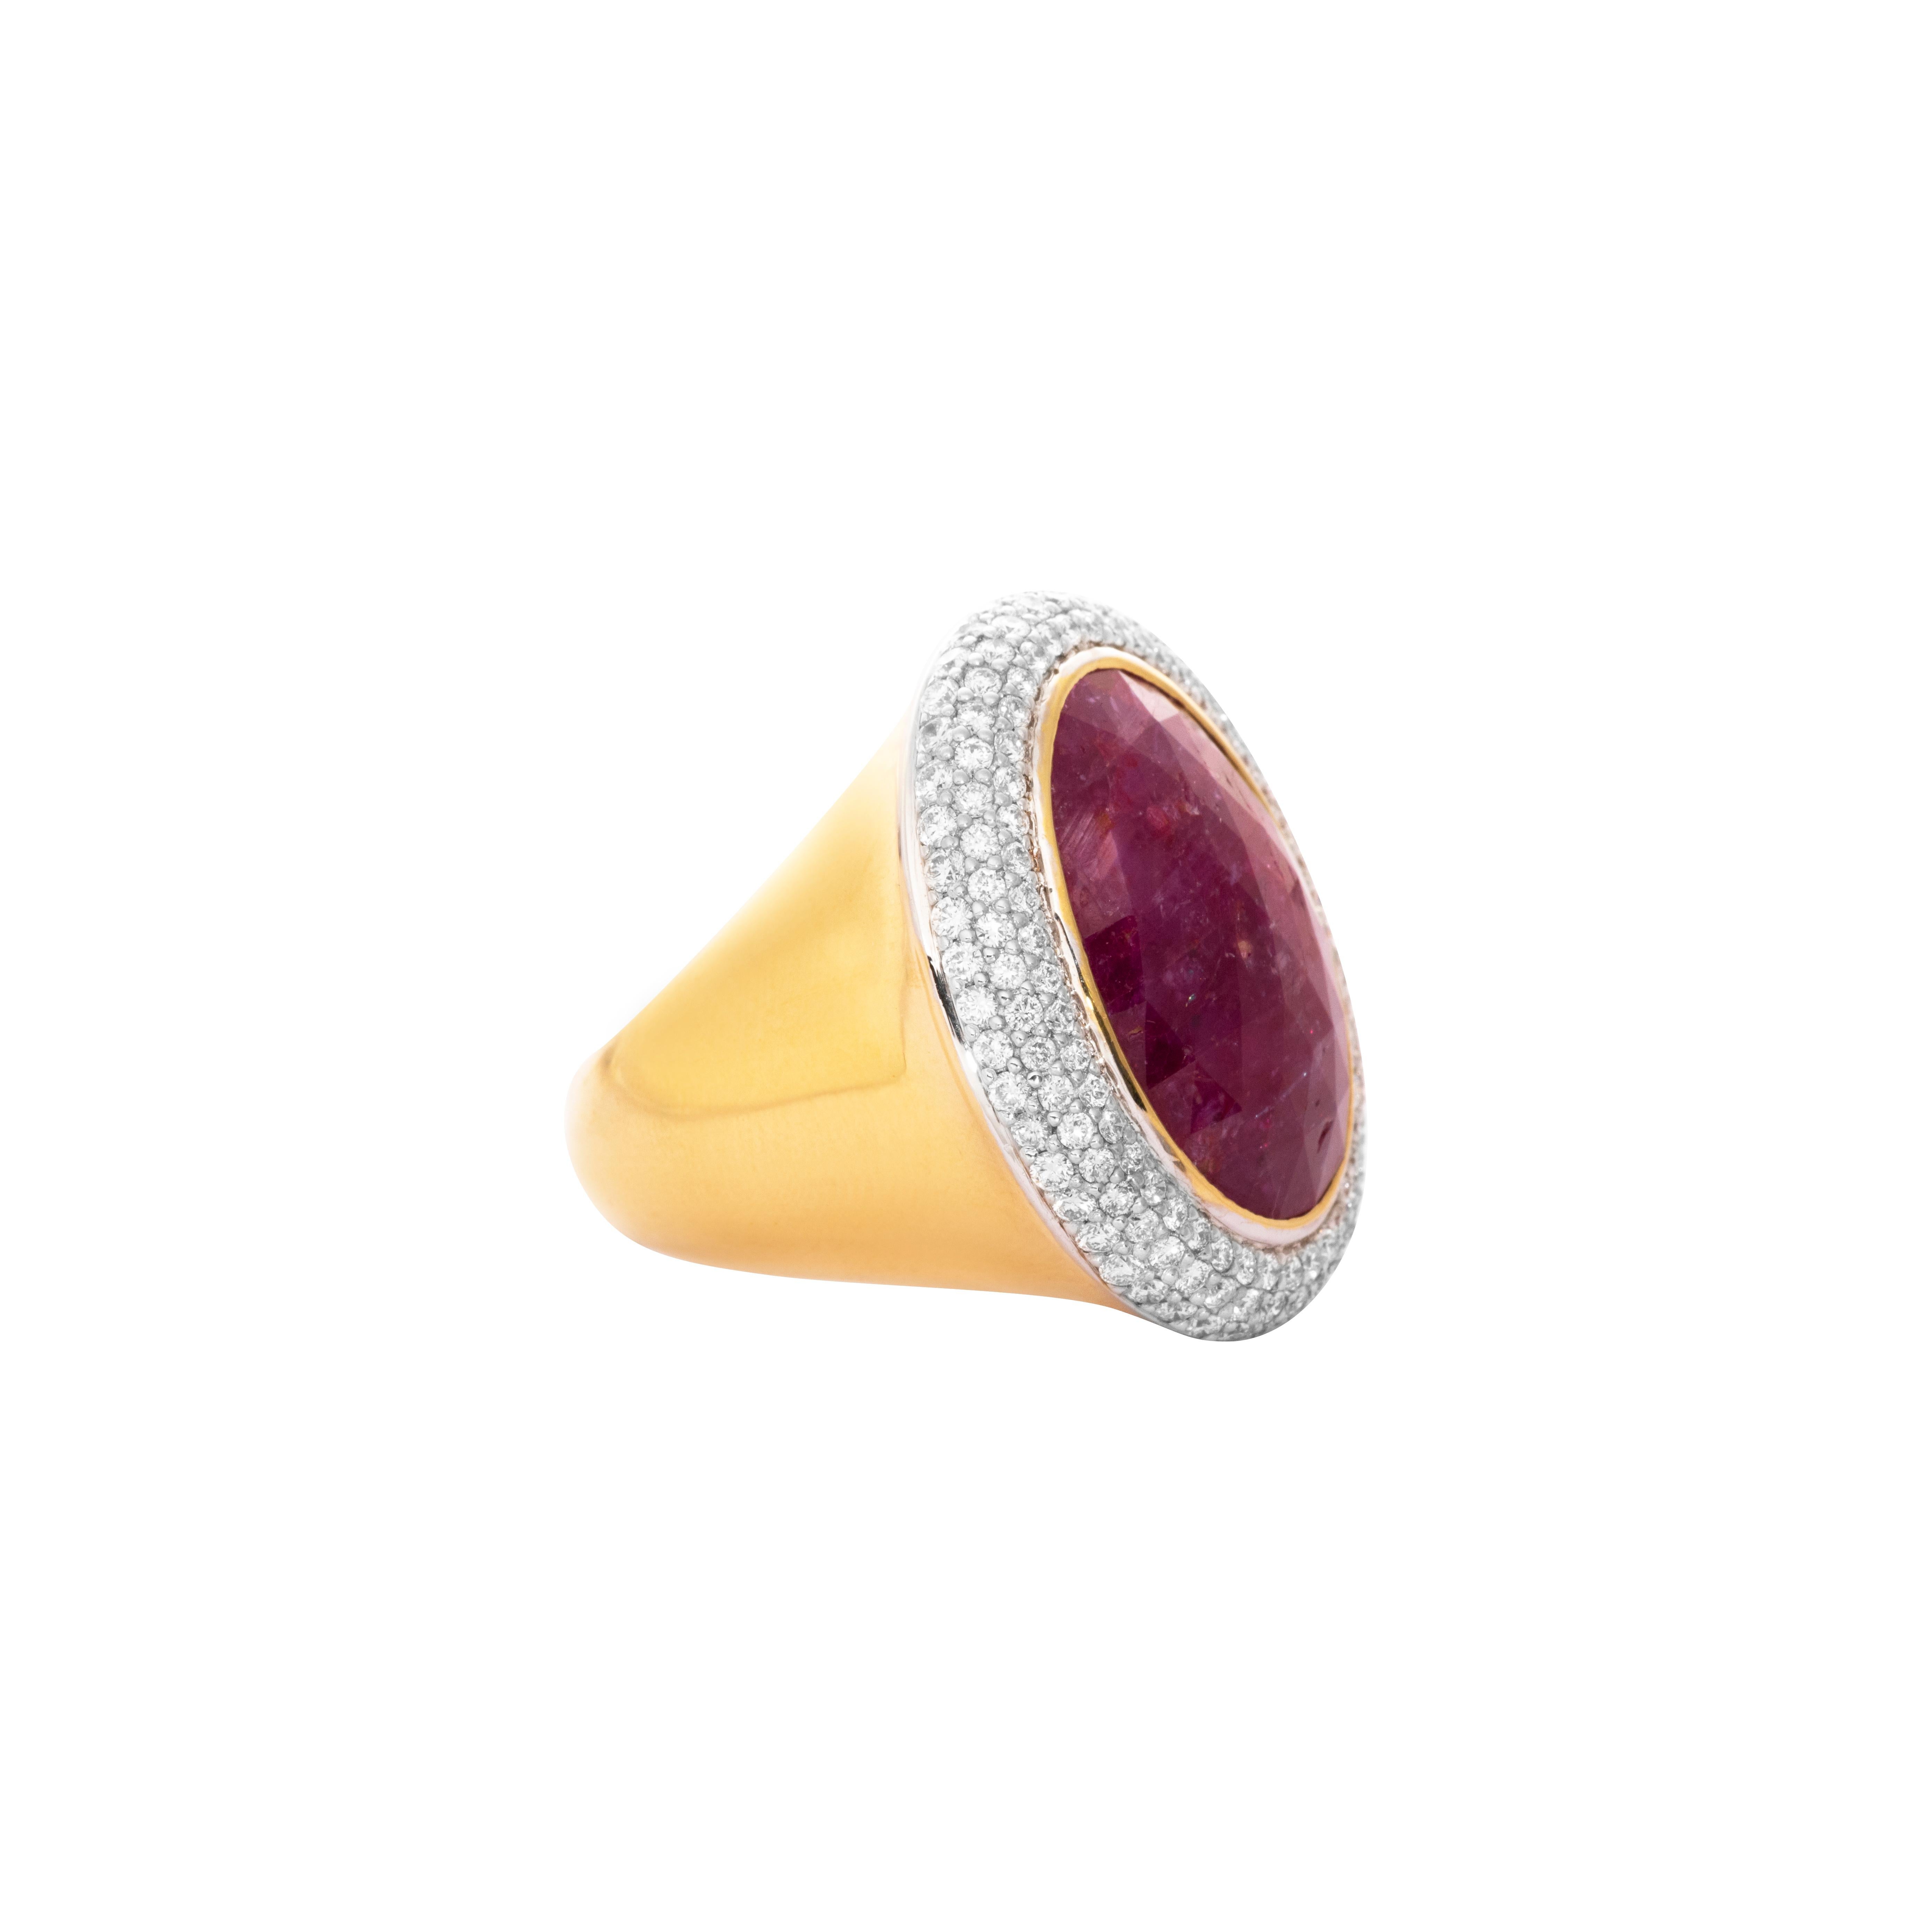 18 Karat Yellow Gold Ruby Diamond Cocktail Ring

Big & Bold, this cocktail ring set in 18 Karat yellow gold studded with a natural ruby and accentuated by diamonds is a definite eye catcher. It is ideal for evening wear and cocktails.

Ruby -